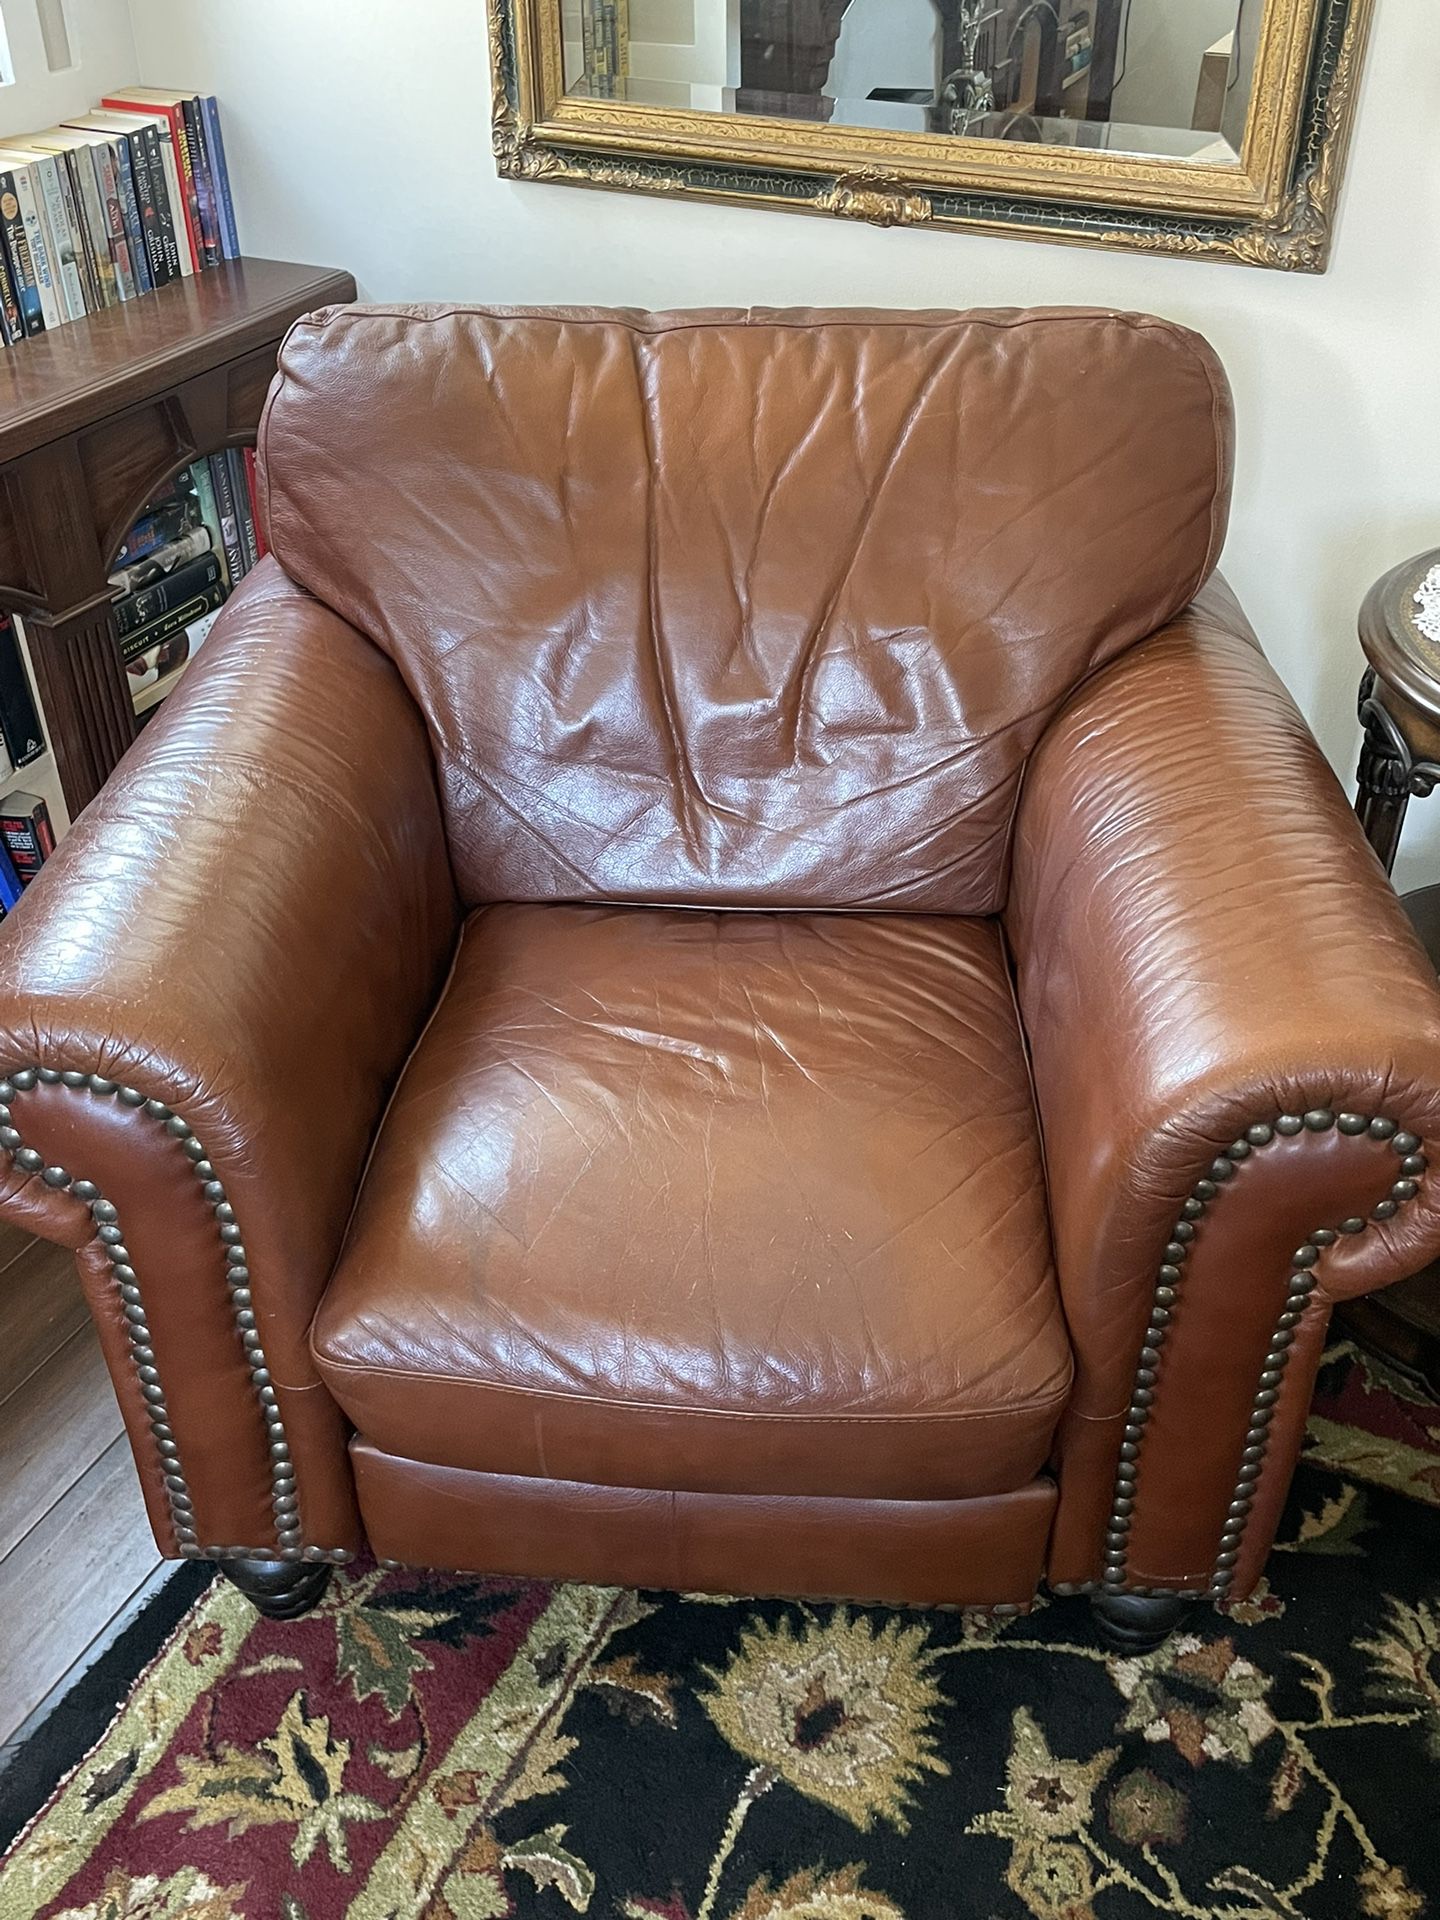 Reddish Brown Leather Reclining Chair